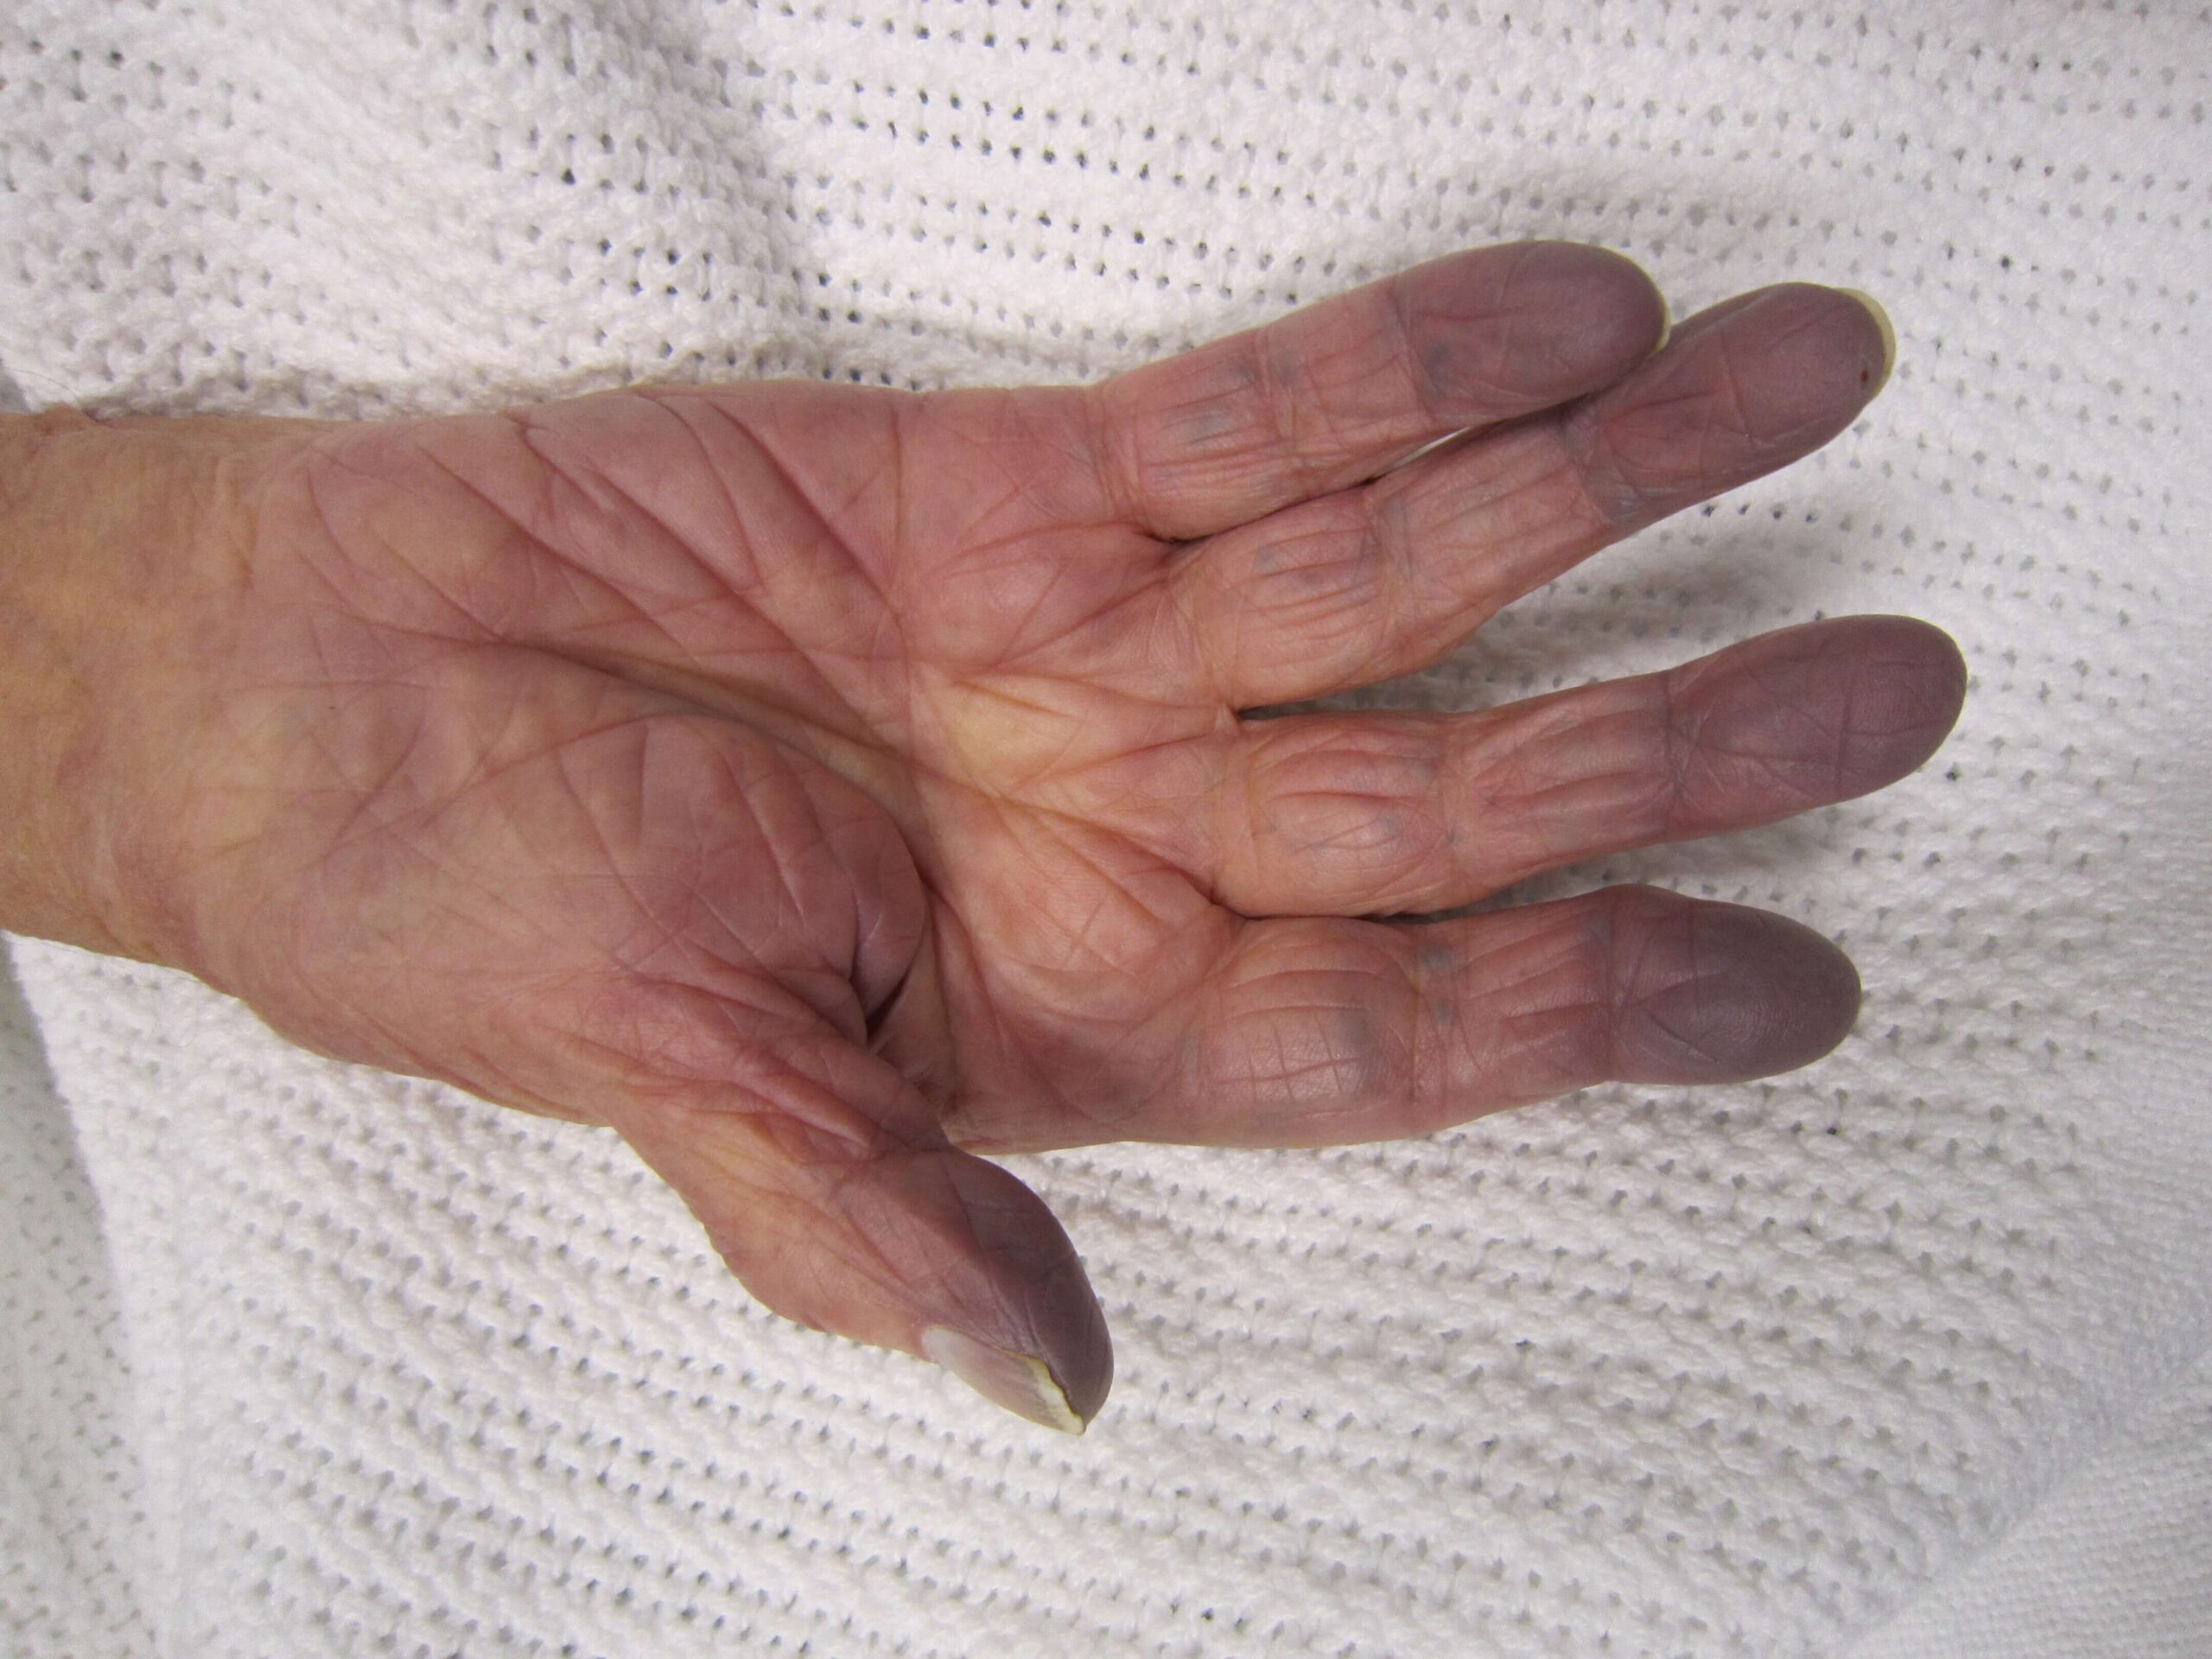 Cyanosis due to low oxygen levels